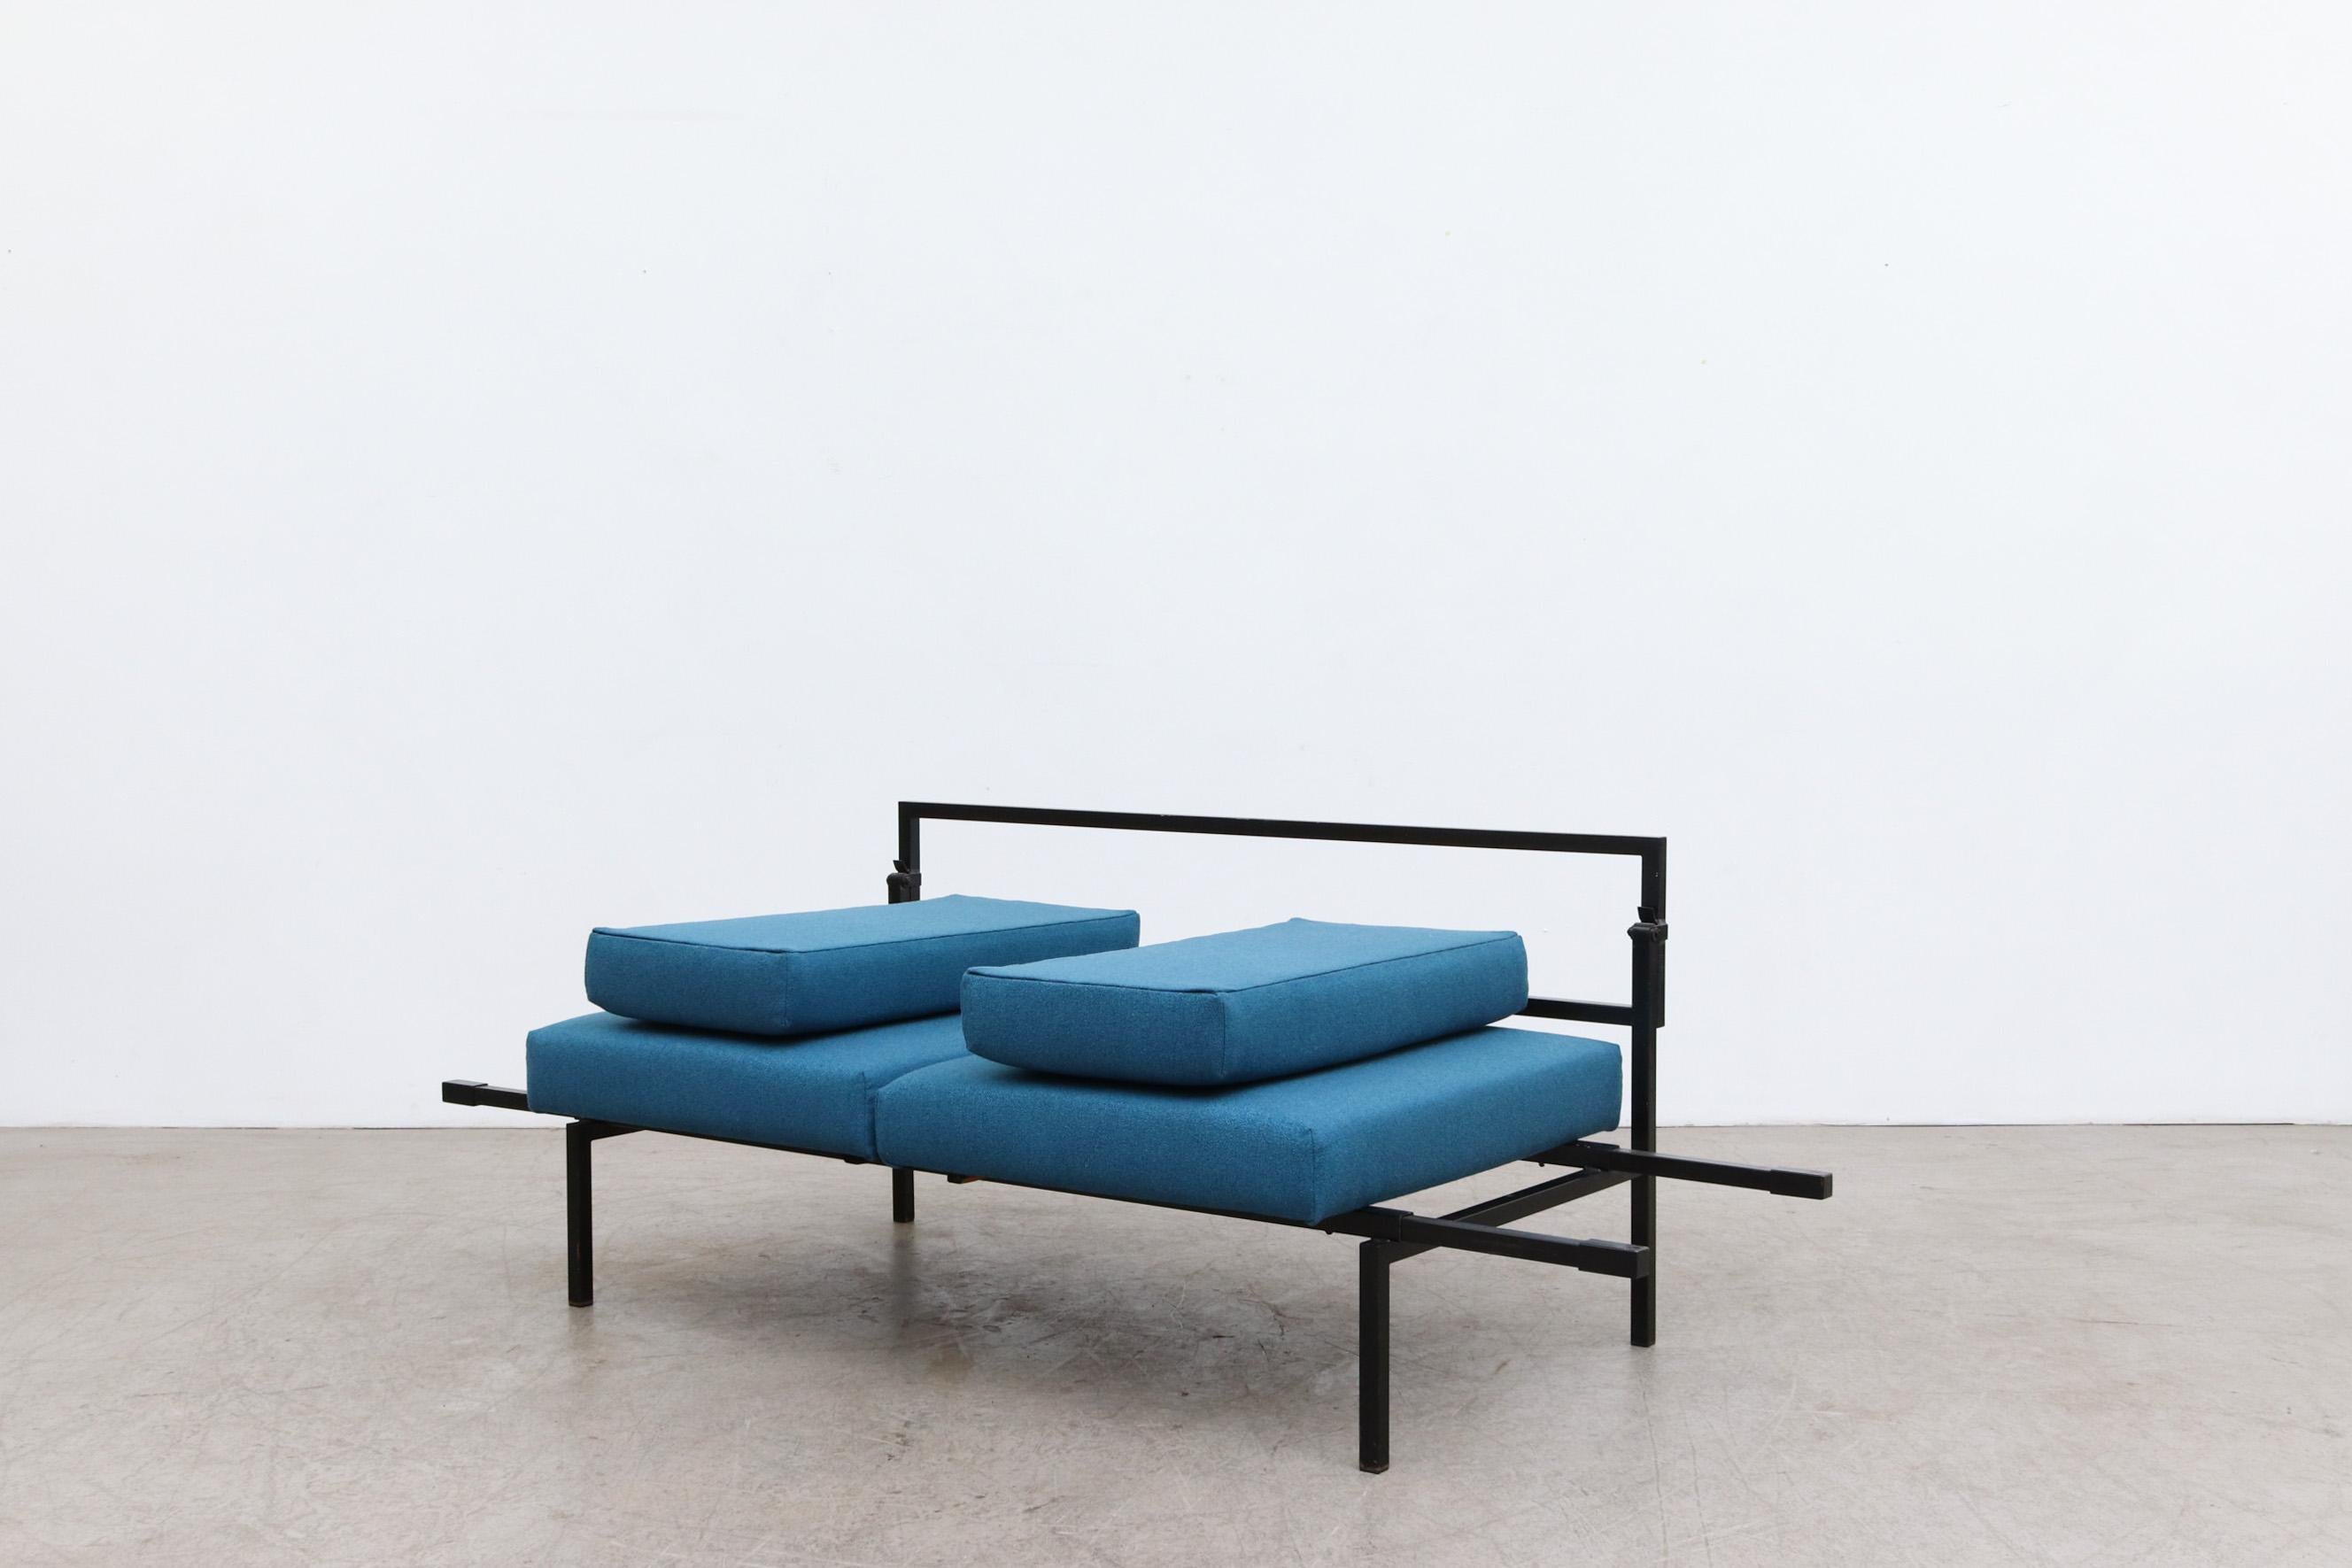 Metal Coen de Vries for Pilastro Convertible Loveseat with Blue Cushions